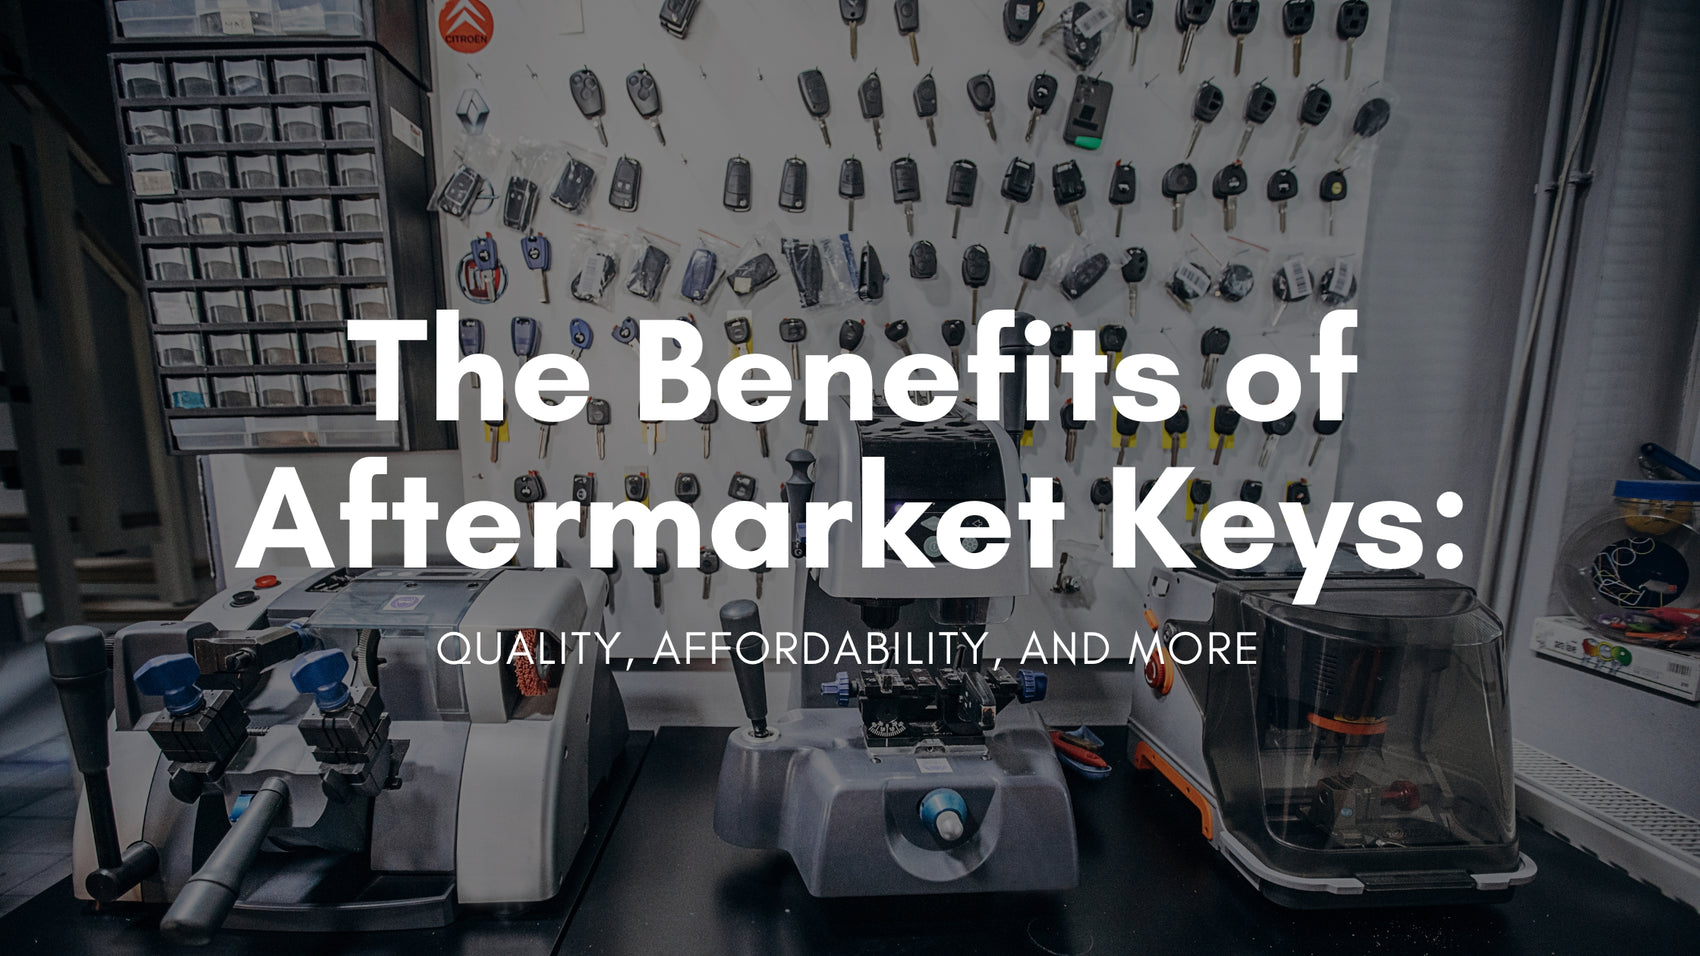 The Benefits of Aftermarket Keys: Quality, Affordability, and More